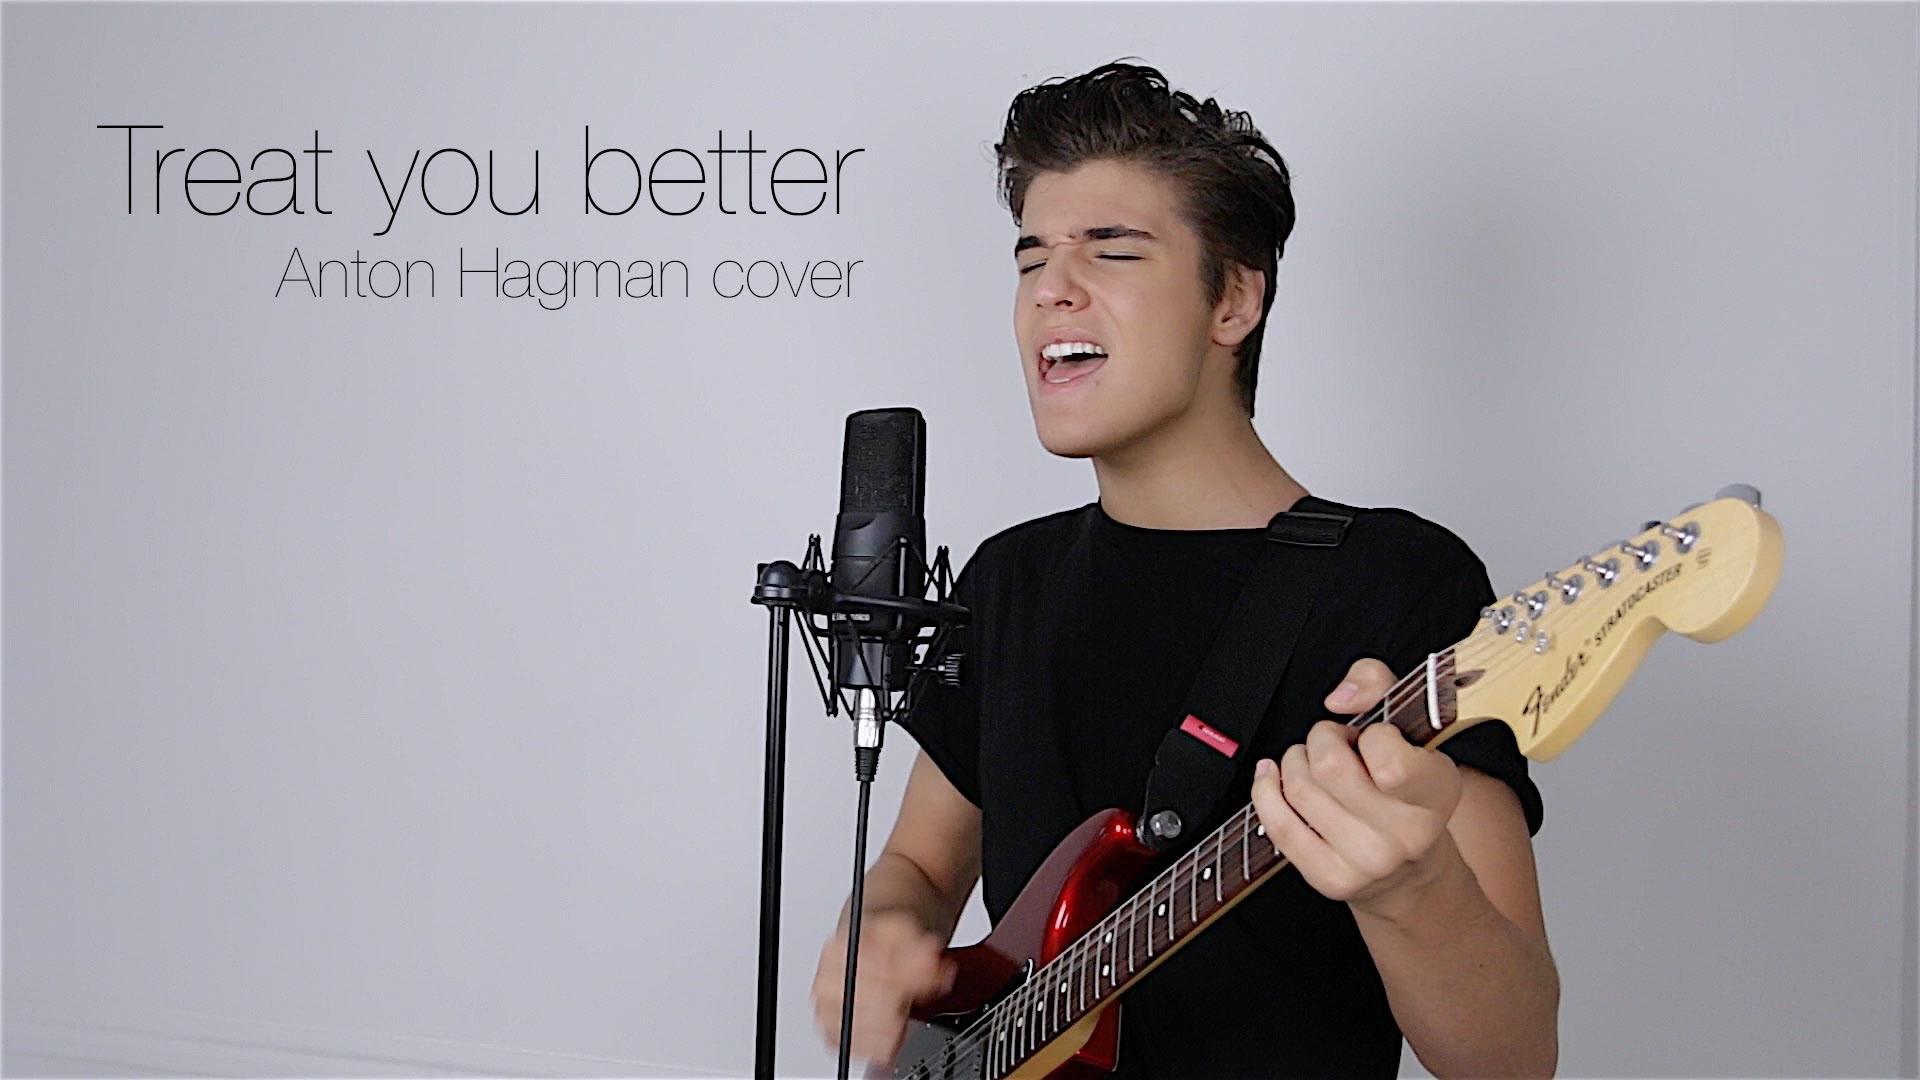 1920x1080 Shawn Mendes - Treat you better, Anton Hagman cover